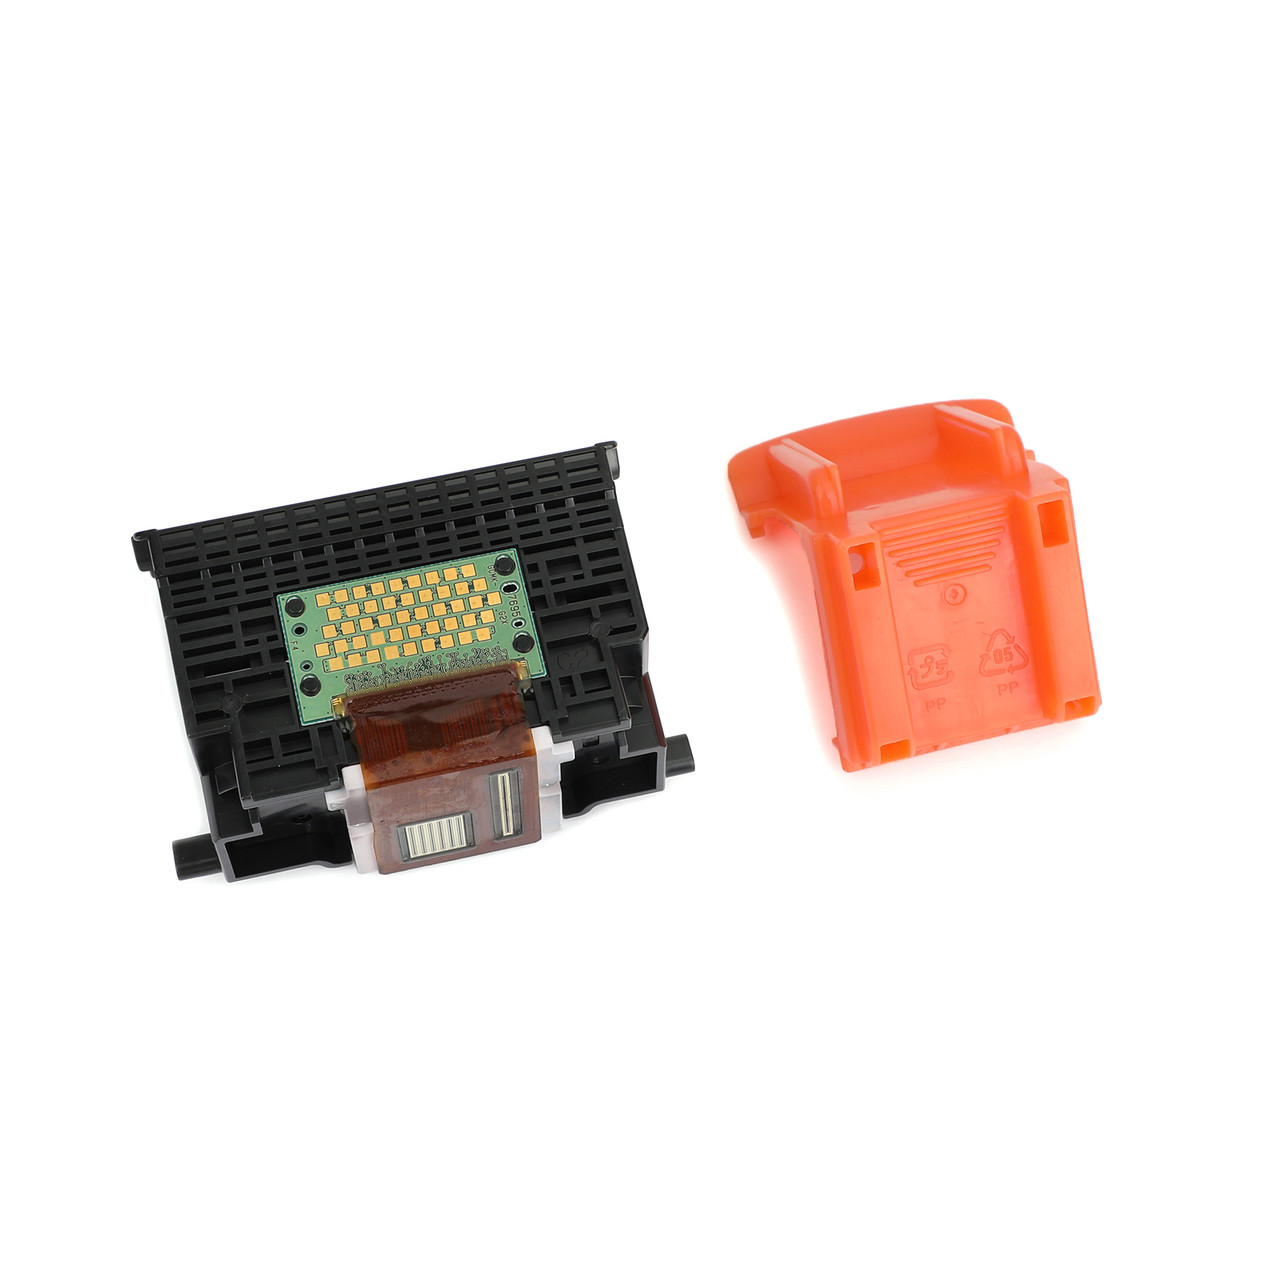 Replacement Printer Print Head QY6-0075 For IP5300 MP810 iP4500 MP610 MX850